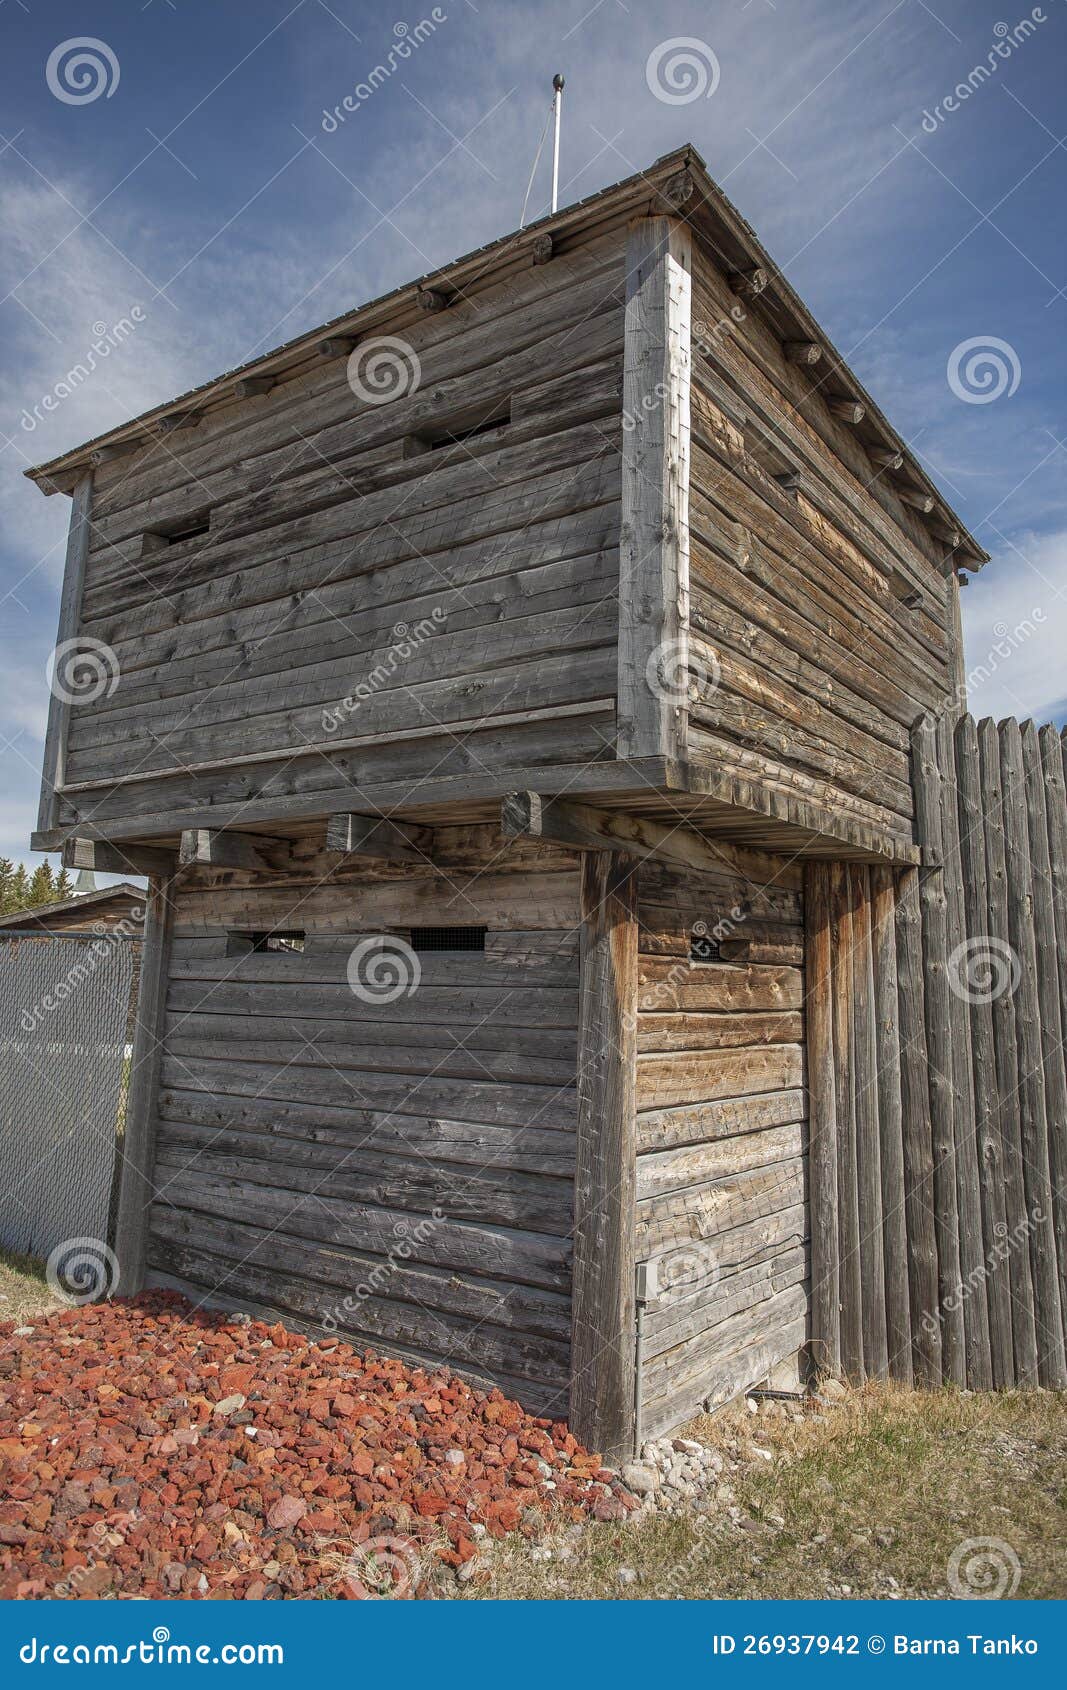 Wooden Fort Building Stock Photography - Image: 26937942